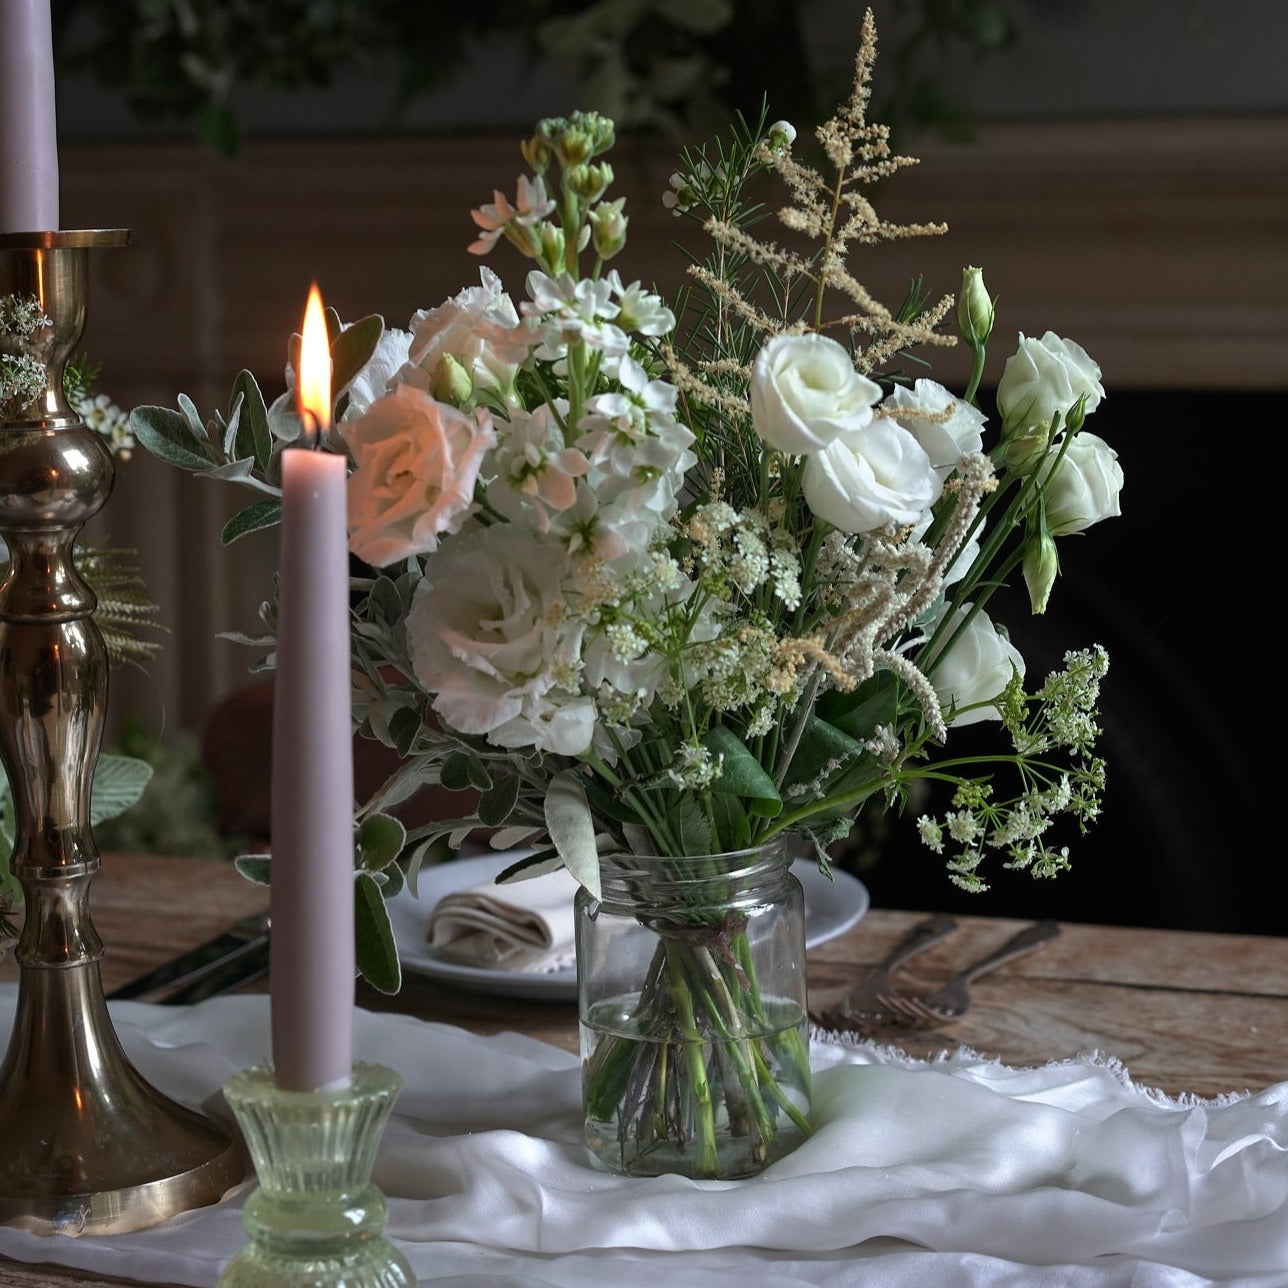 classic white table arrangements for weddings and events by Botanique Workshop London